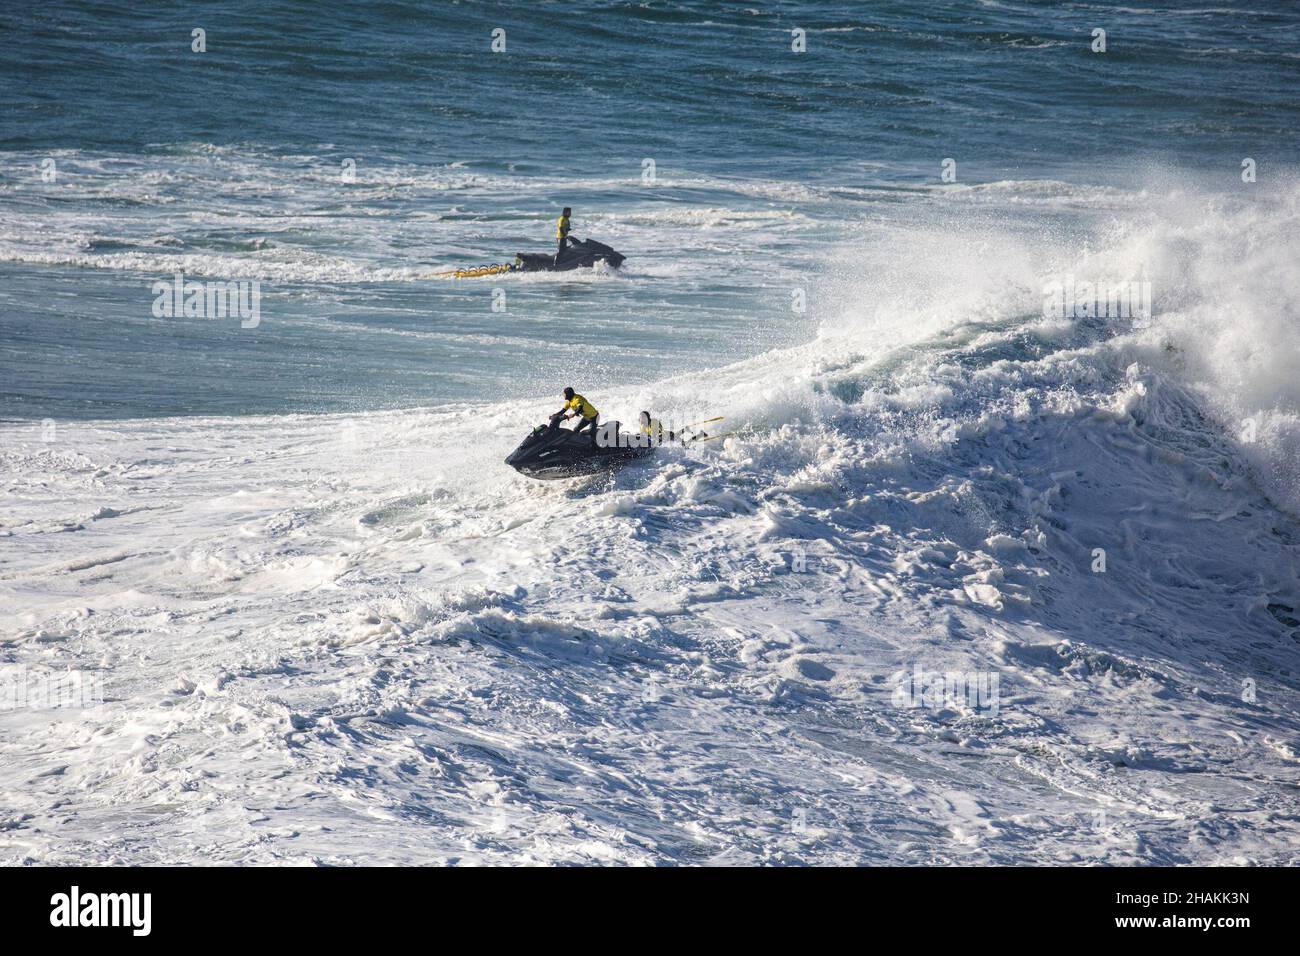 Big wave surfer Pedro Scooby from Brazil rides a wave during a tow surfing  session at Praia do Norte on the first big swell of winter season. (Photo  by Henrique Casinhas /